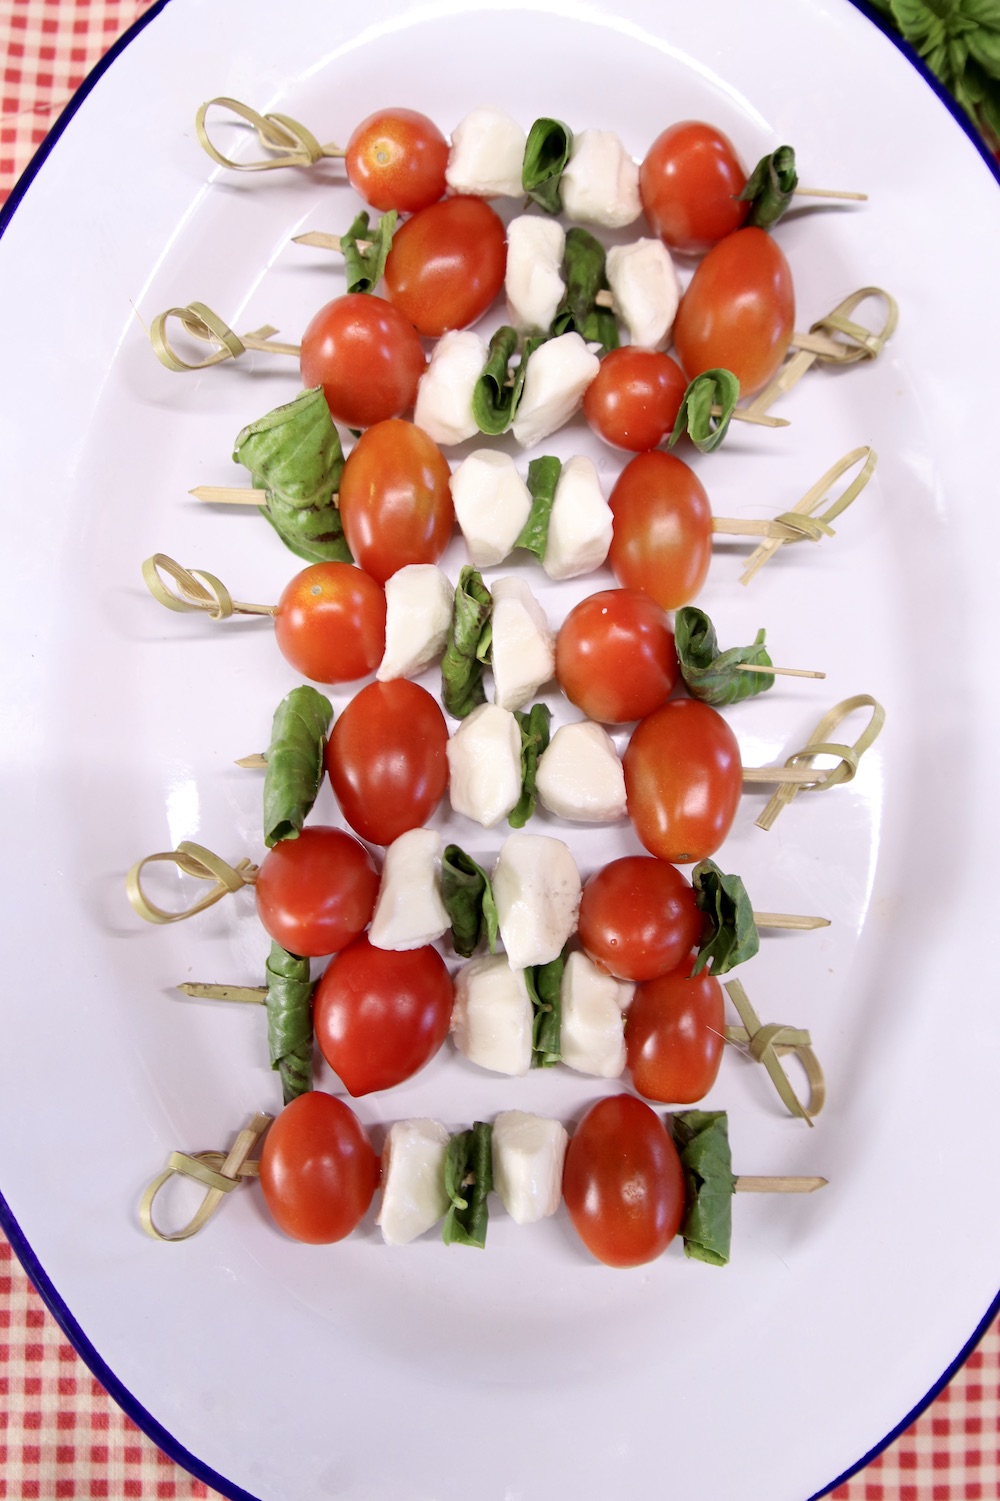 tomato, mozzarella balls and basil on bamboo skewers on a platter